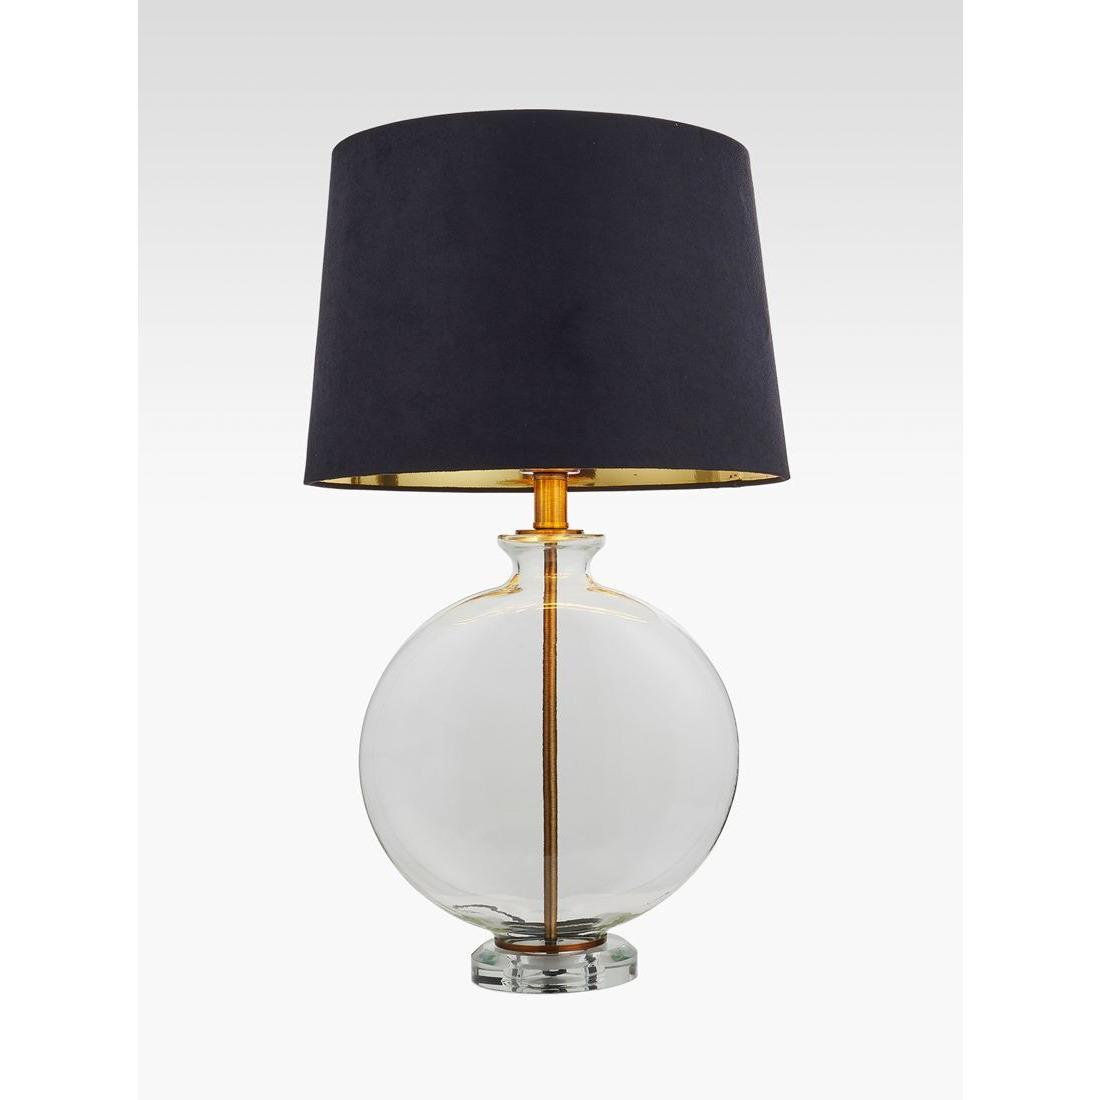 Bay Lighting Liza Glass Table Lamp, Clear/Antique Brass - image 1